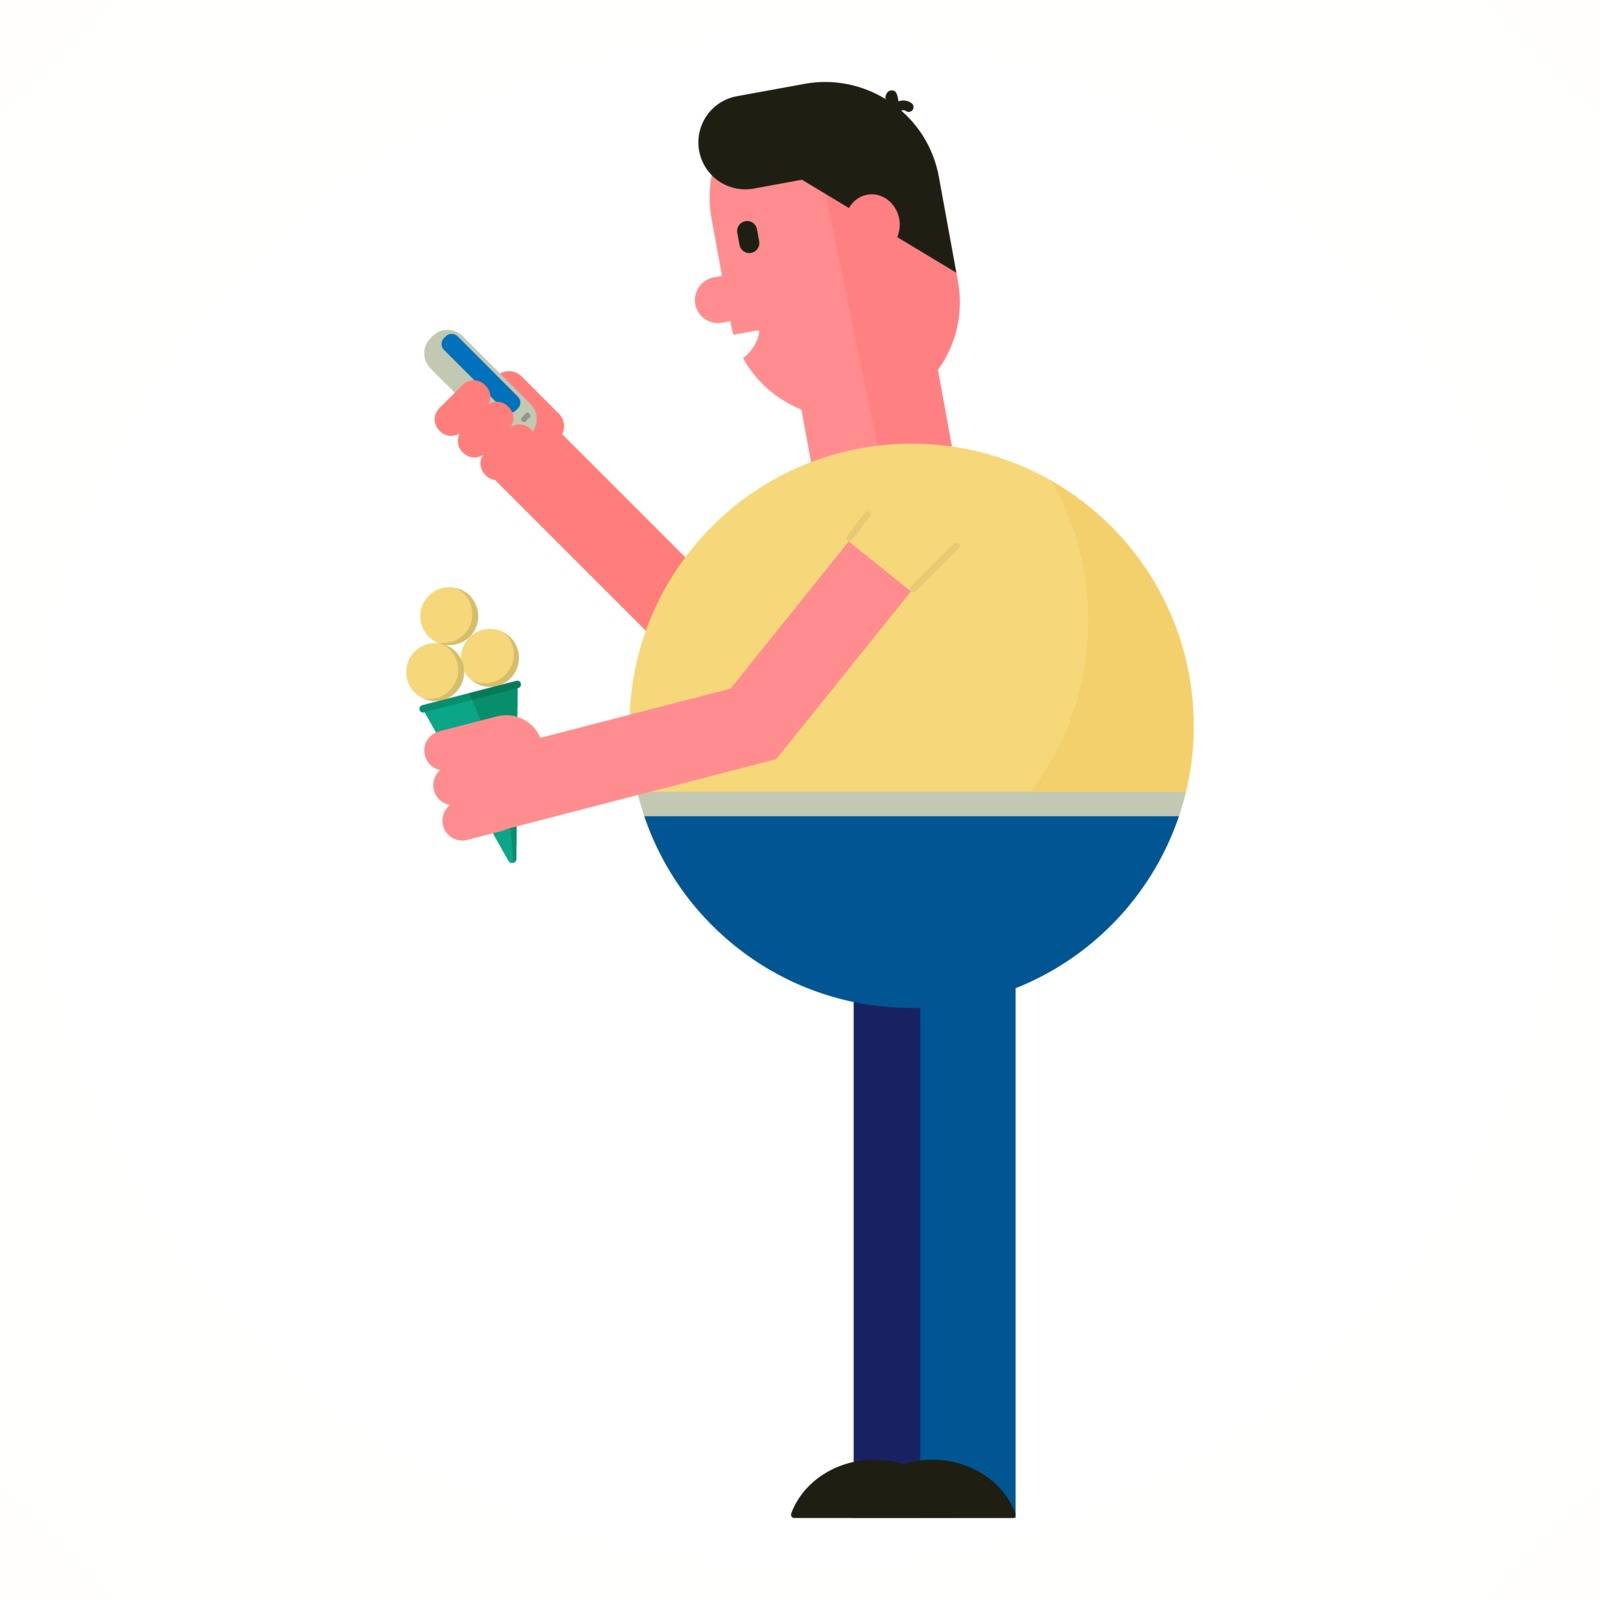 Vector illustration of a man with ice cream and mobile phone. Flat design style.